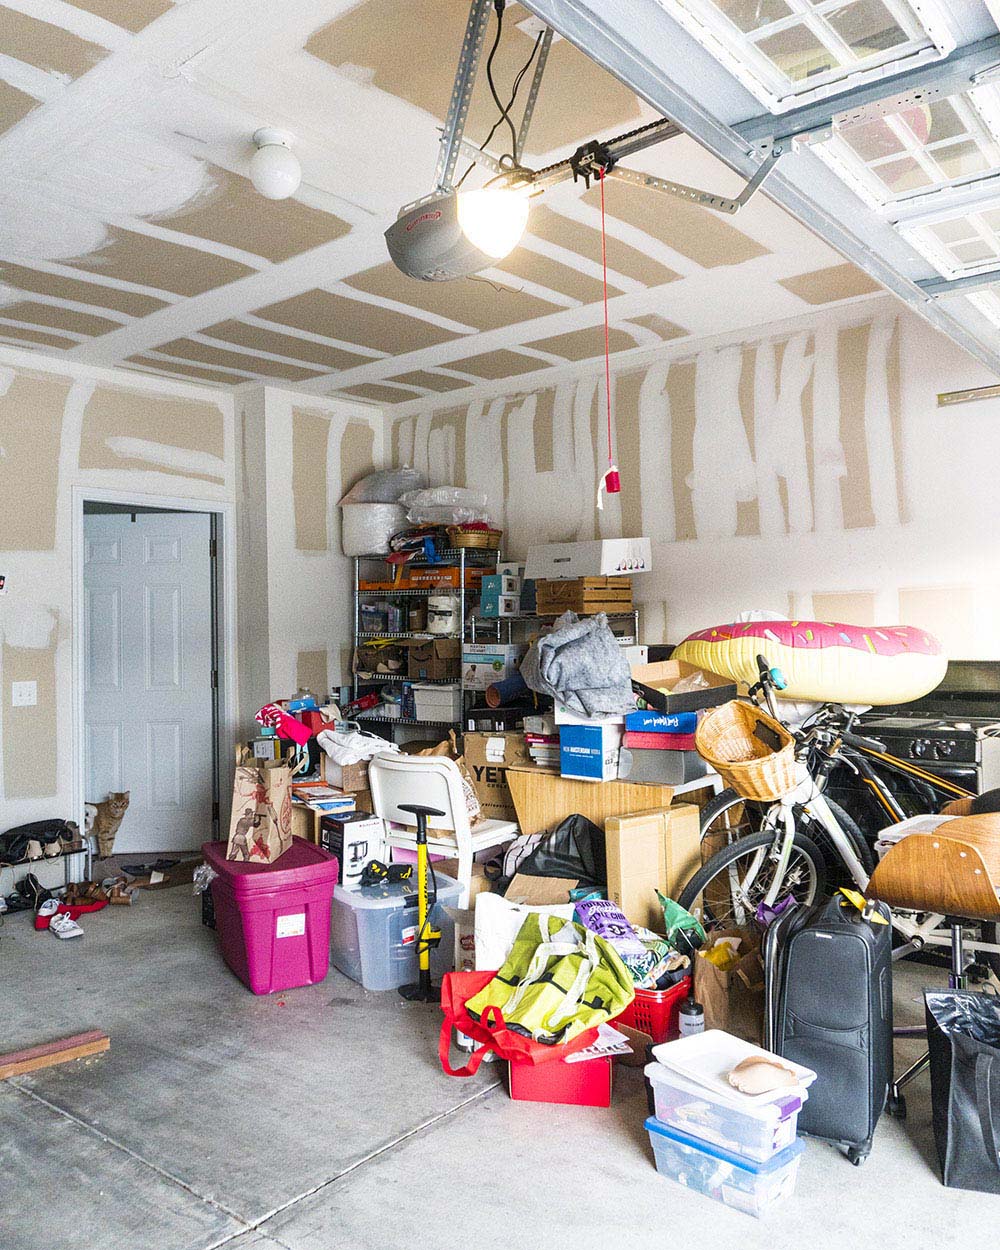 A garage with items on the floor prior to organization